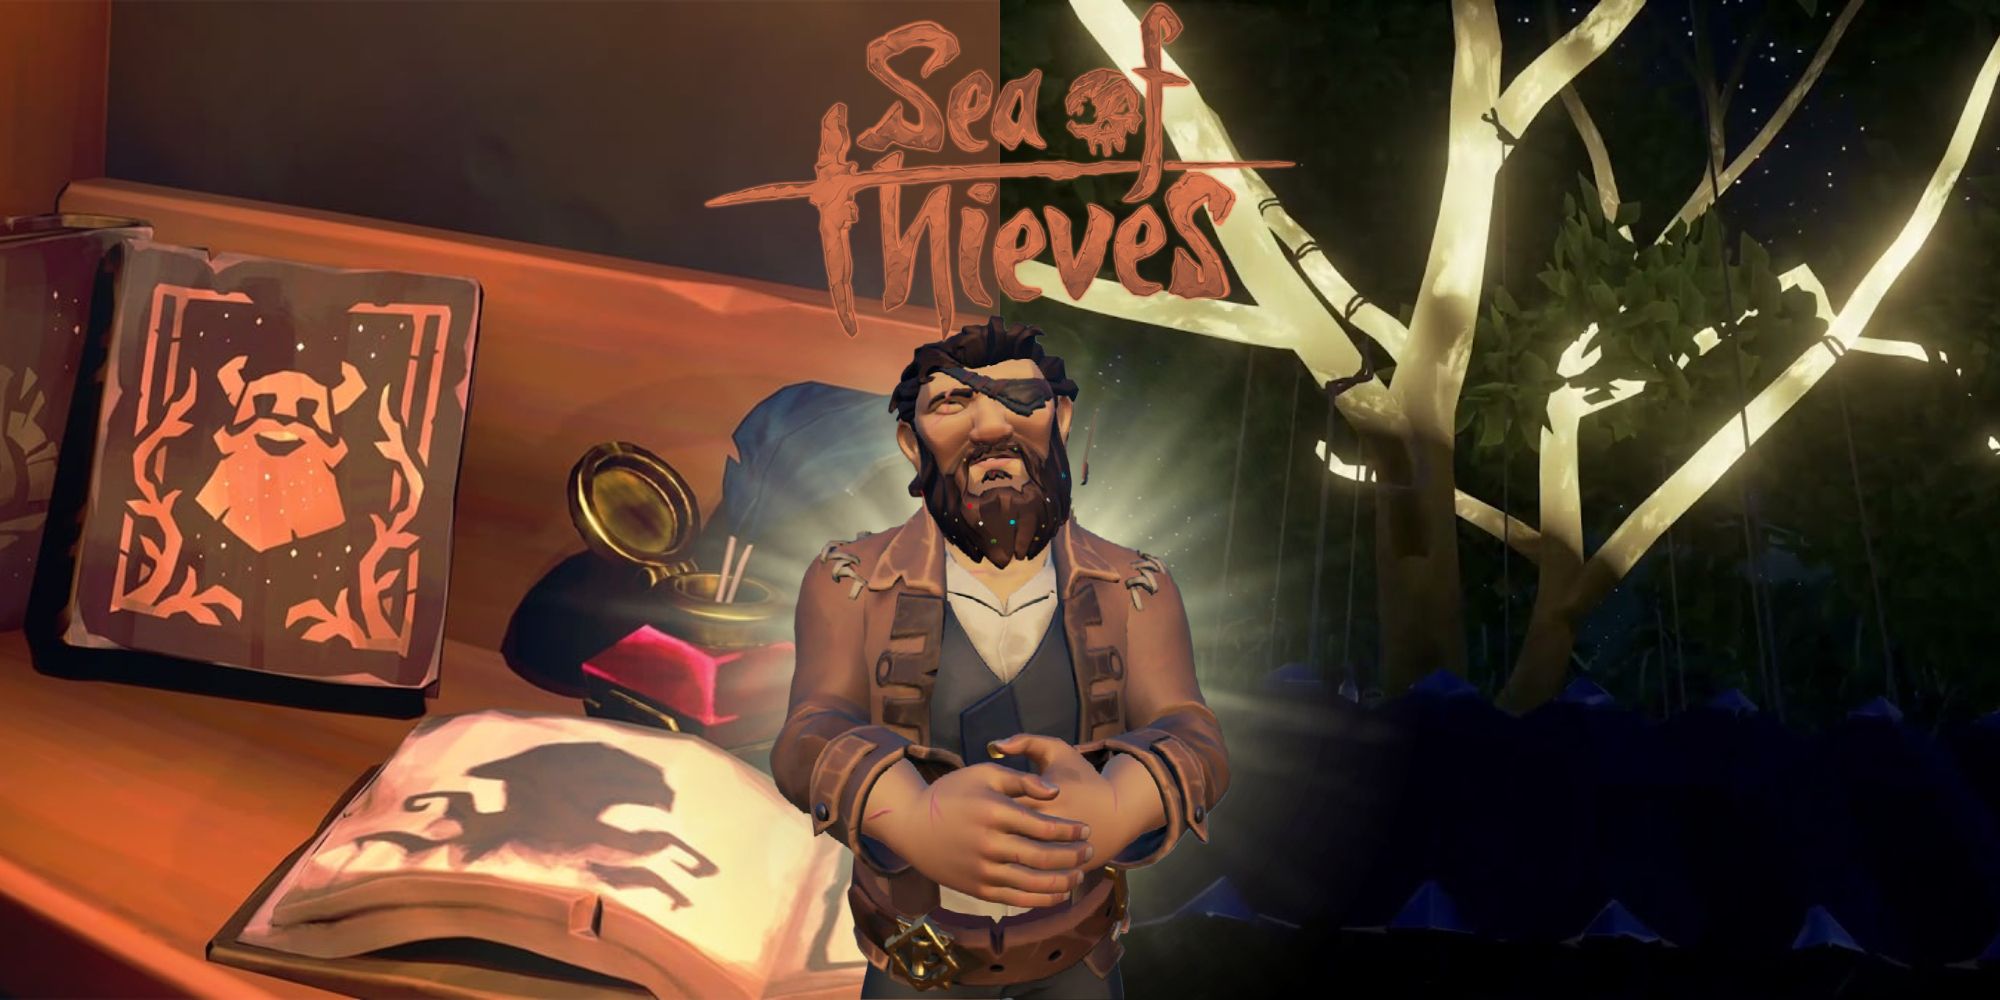 Sea of Thieves backgrounds and character